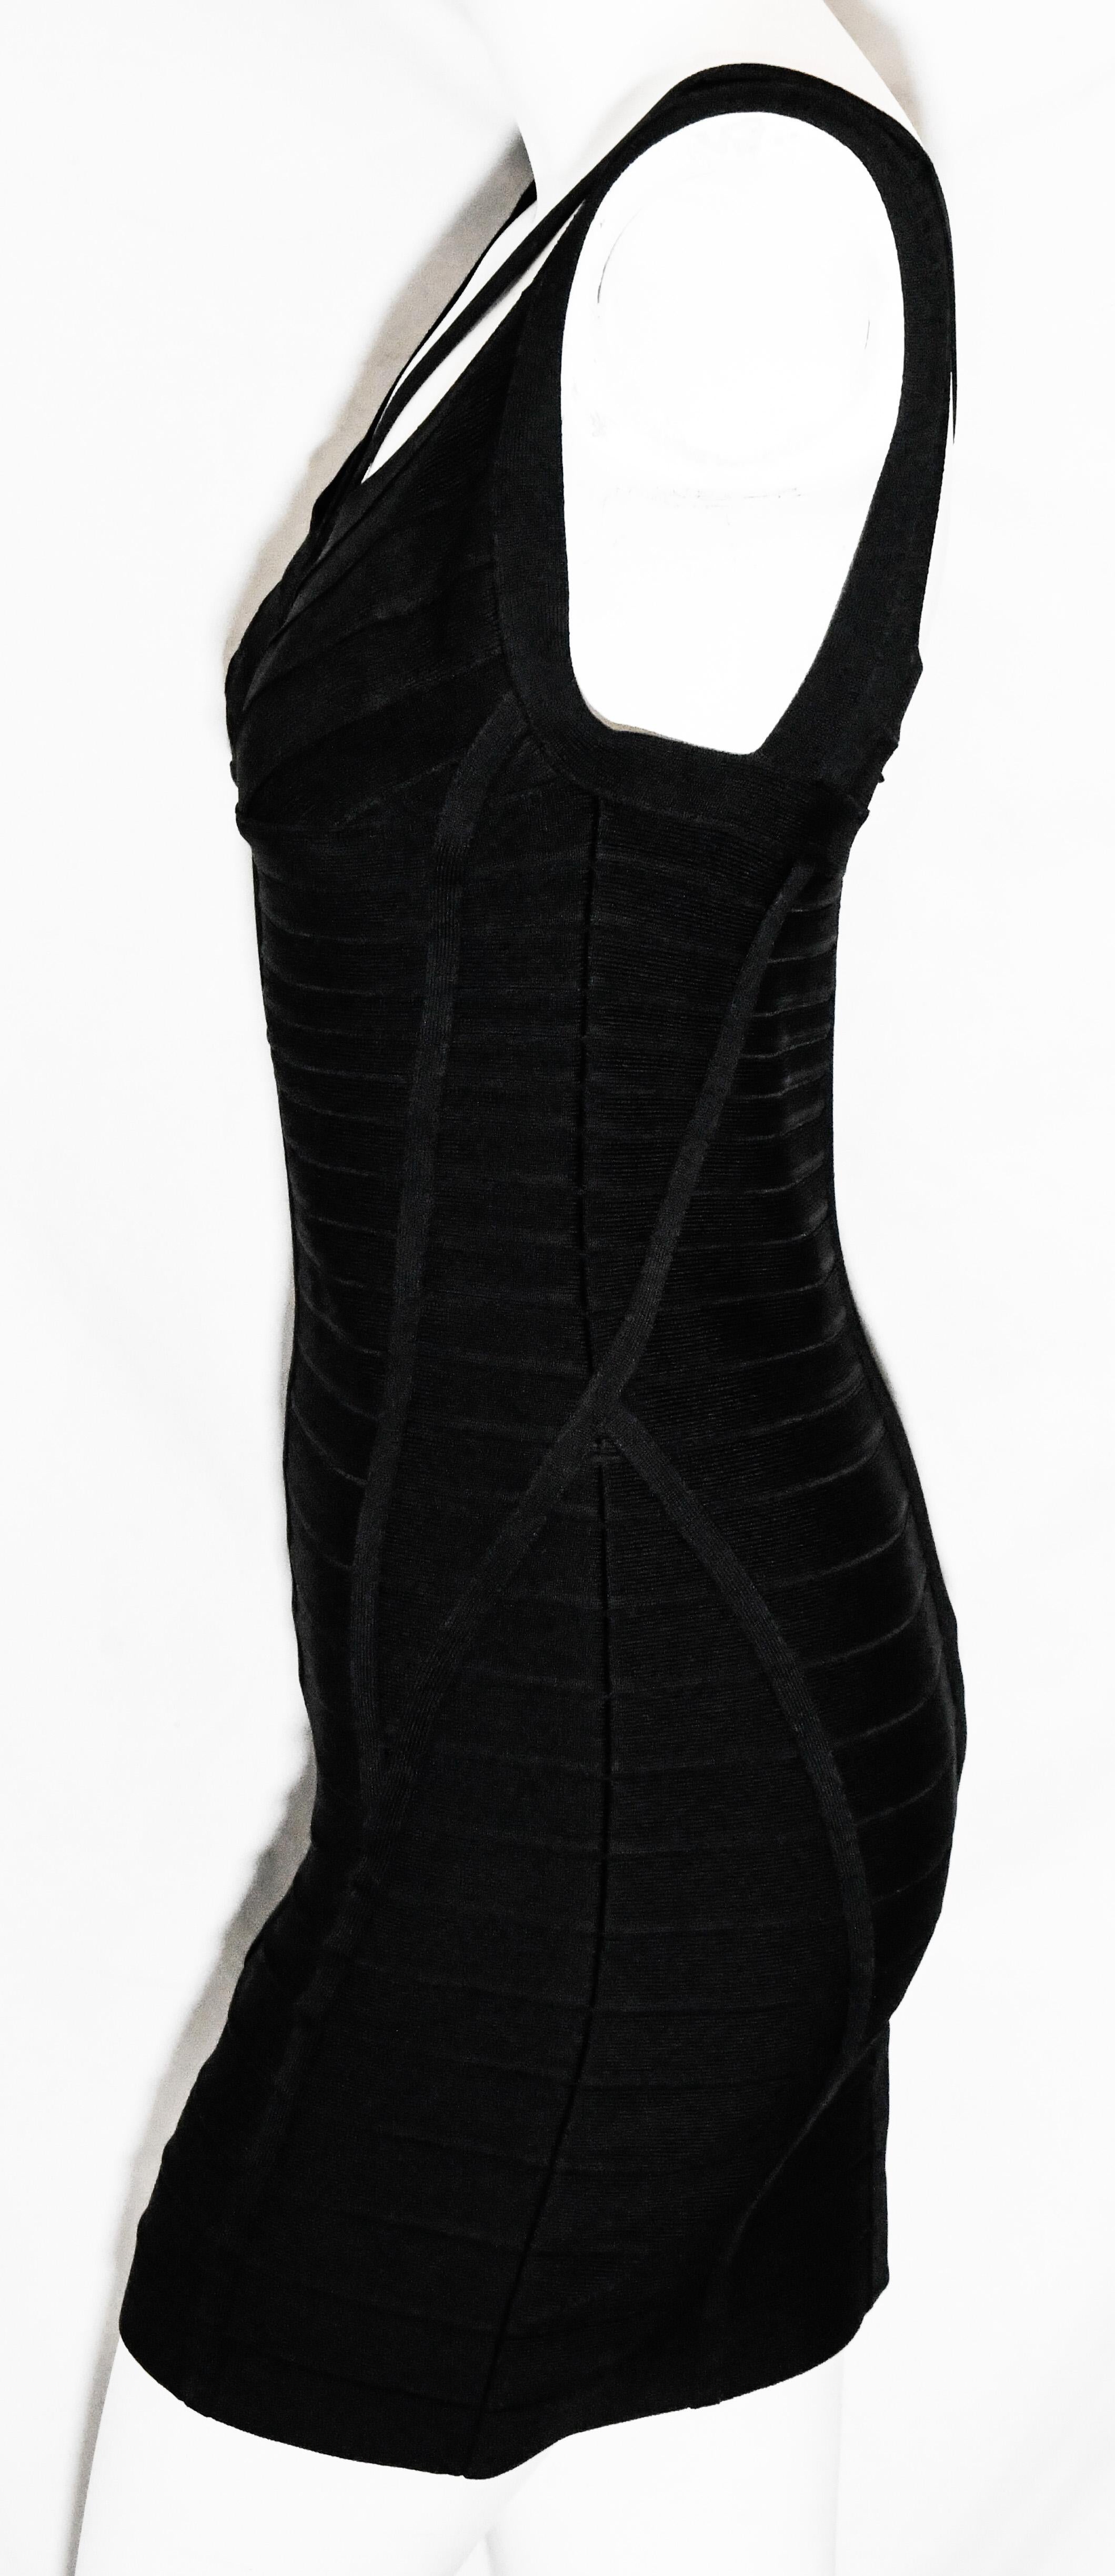 Herve Leger's black bodycon dresses have become essential pieces worthy of any collection of 